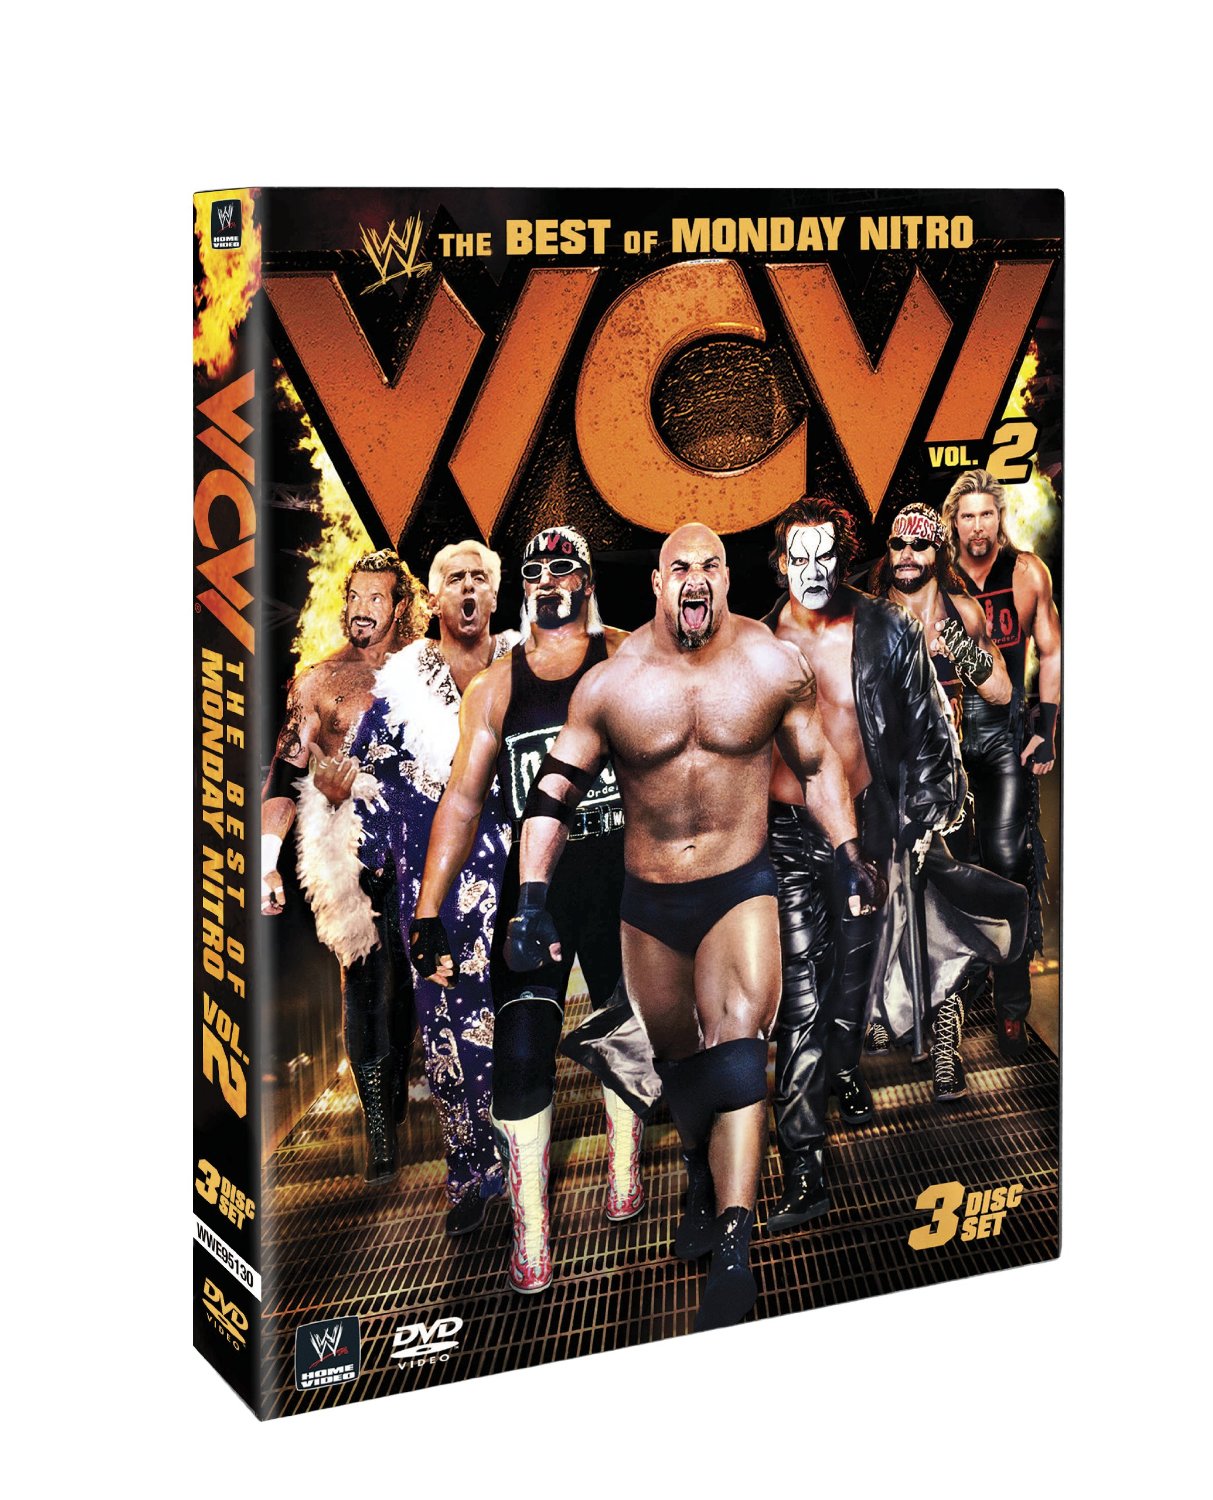 Dvdlegion Wwe The Very Best Of Wcw Monday Nitro Vol Dvd Review